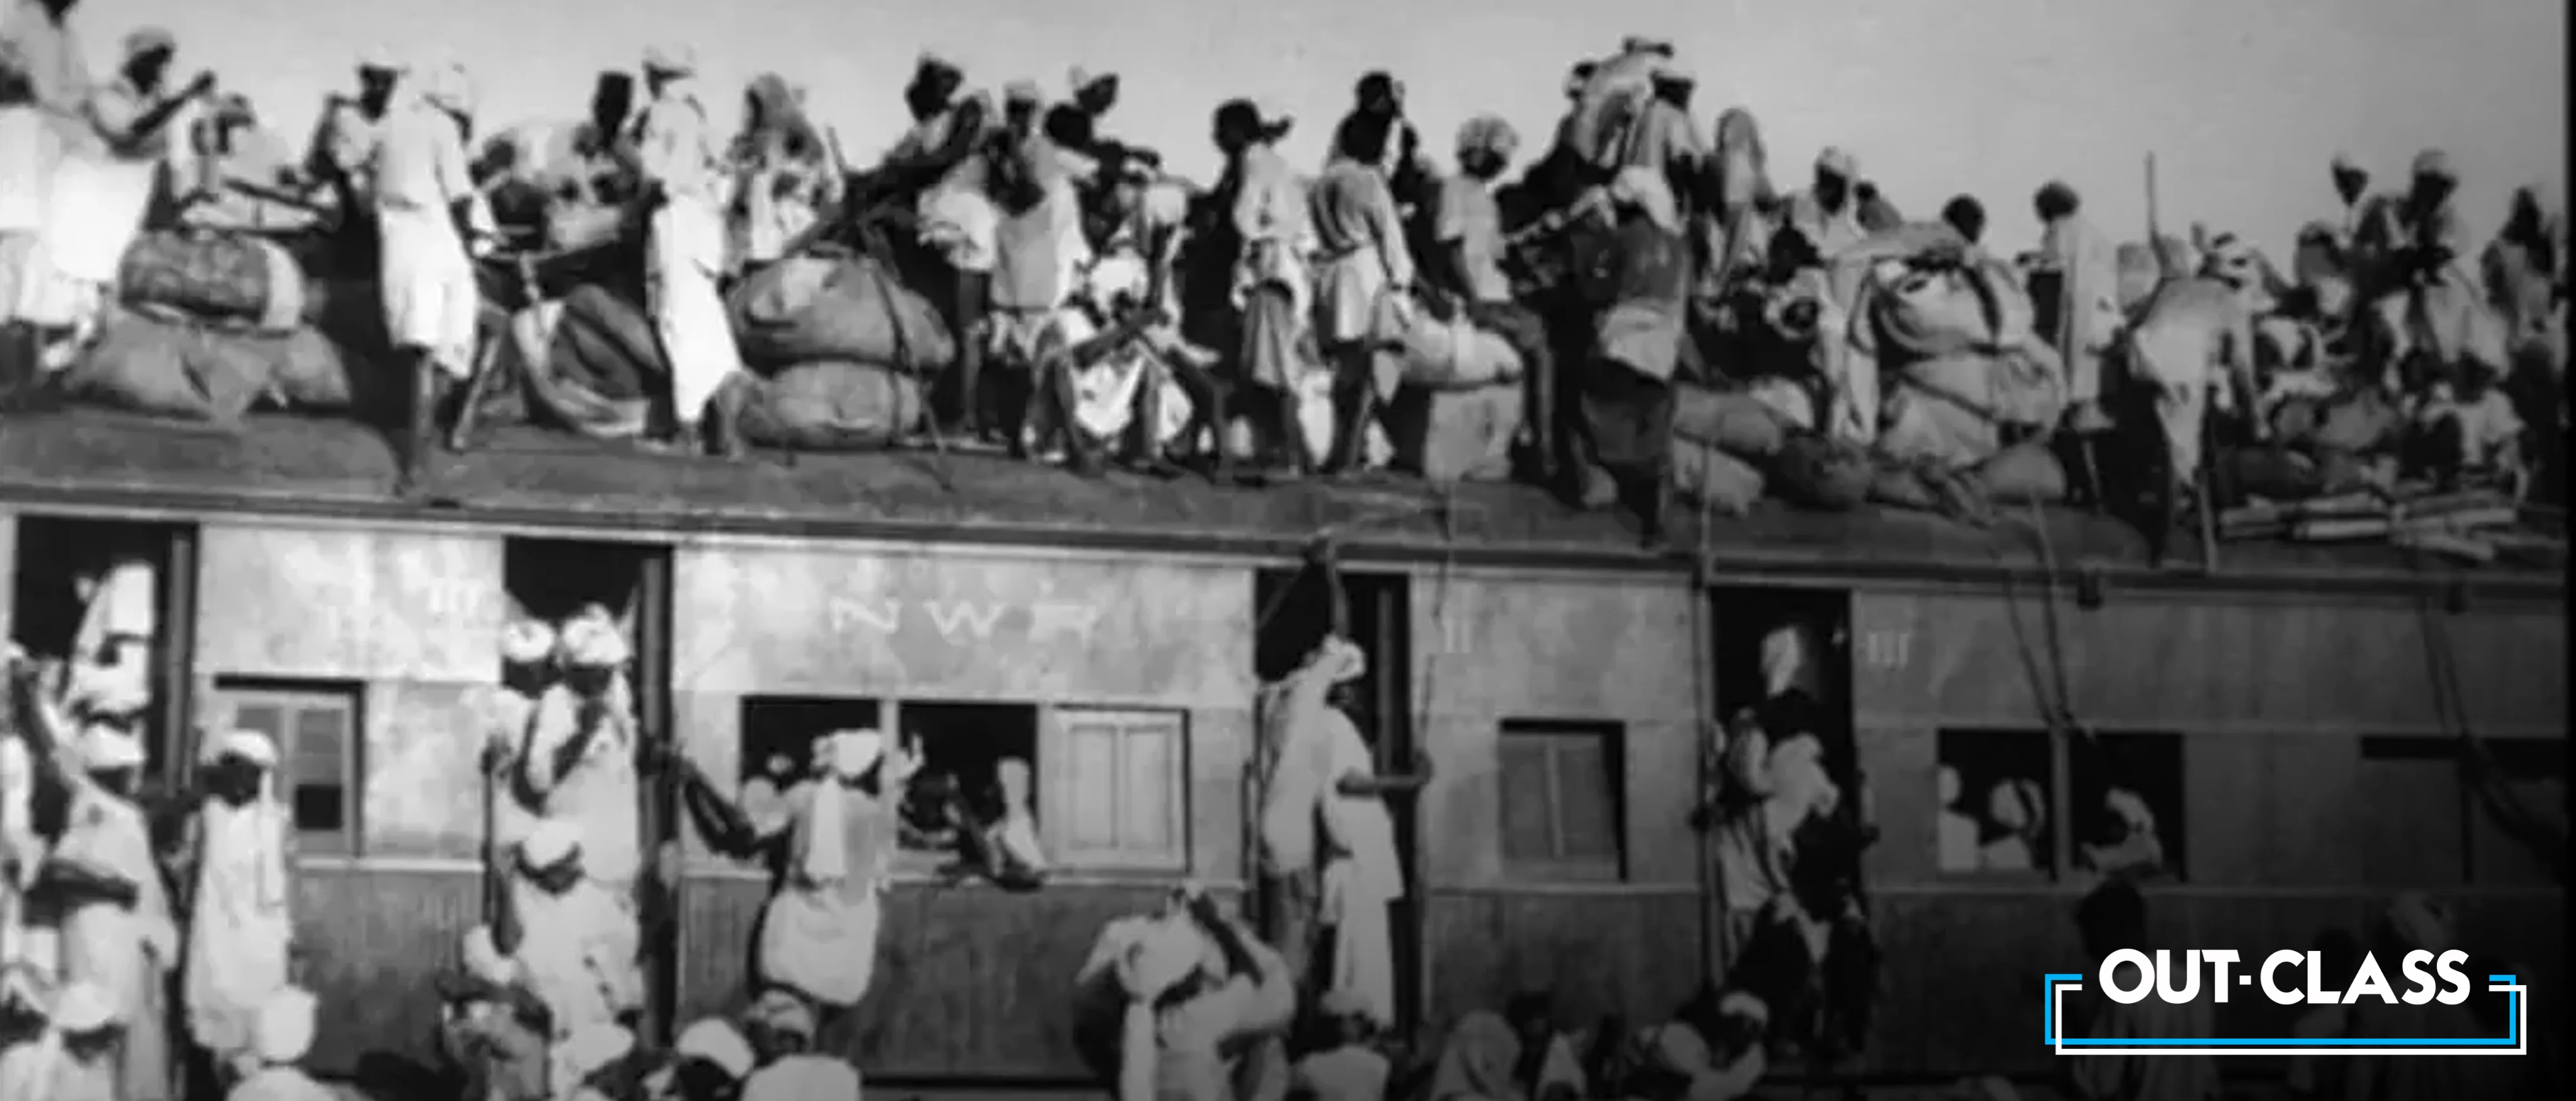 Partition of bengal (1905) was caused by Lord Curzon, Viceroy of India. Hindus opposed the partition of bengal and this blog illustrates the partition of bengal background as well as the causes of partition of bengal. The impact of partition of bengal signifies the creation of Pakistan Movement.